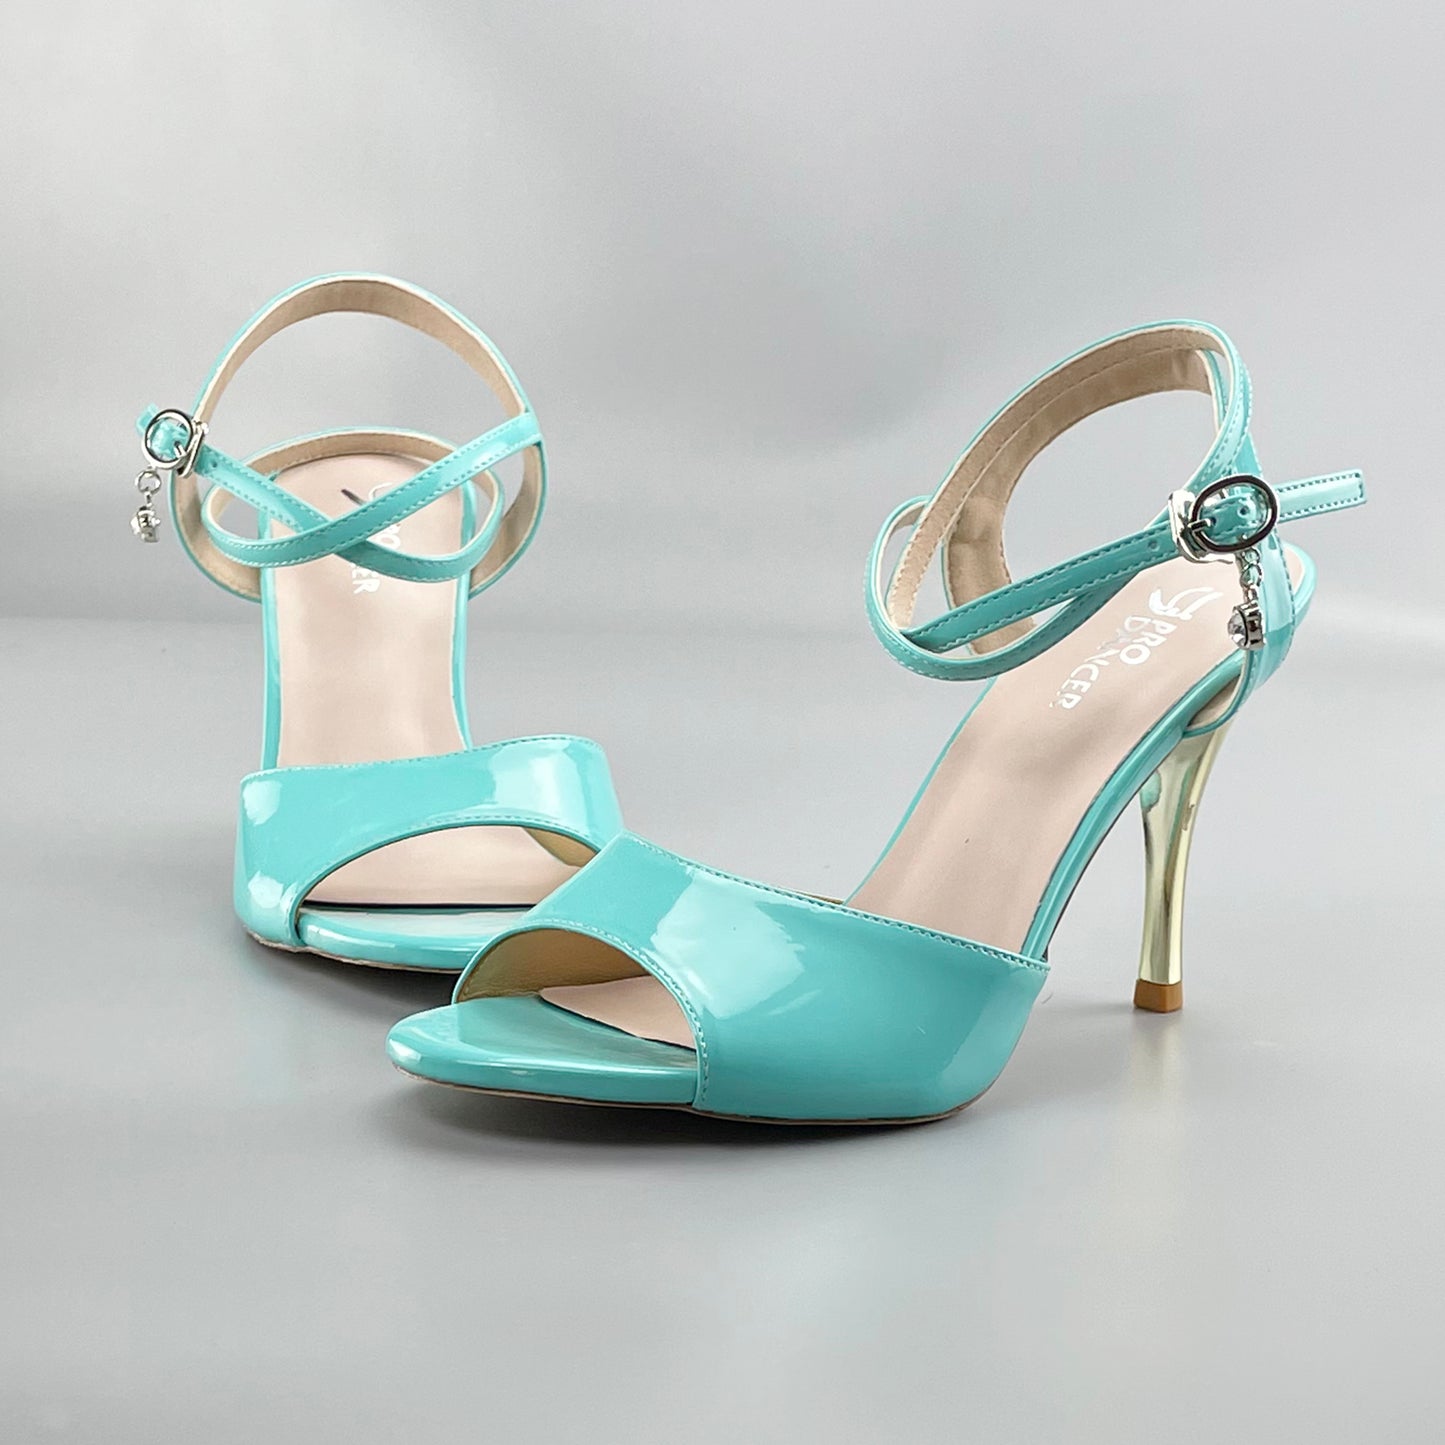 Pro Dancer Peep-toe Argentine Tango Shoes Closed-back High Heels Hard Leather Sole Blue (PD-9050A)